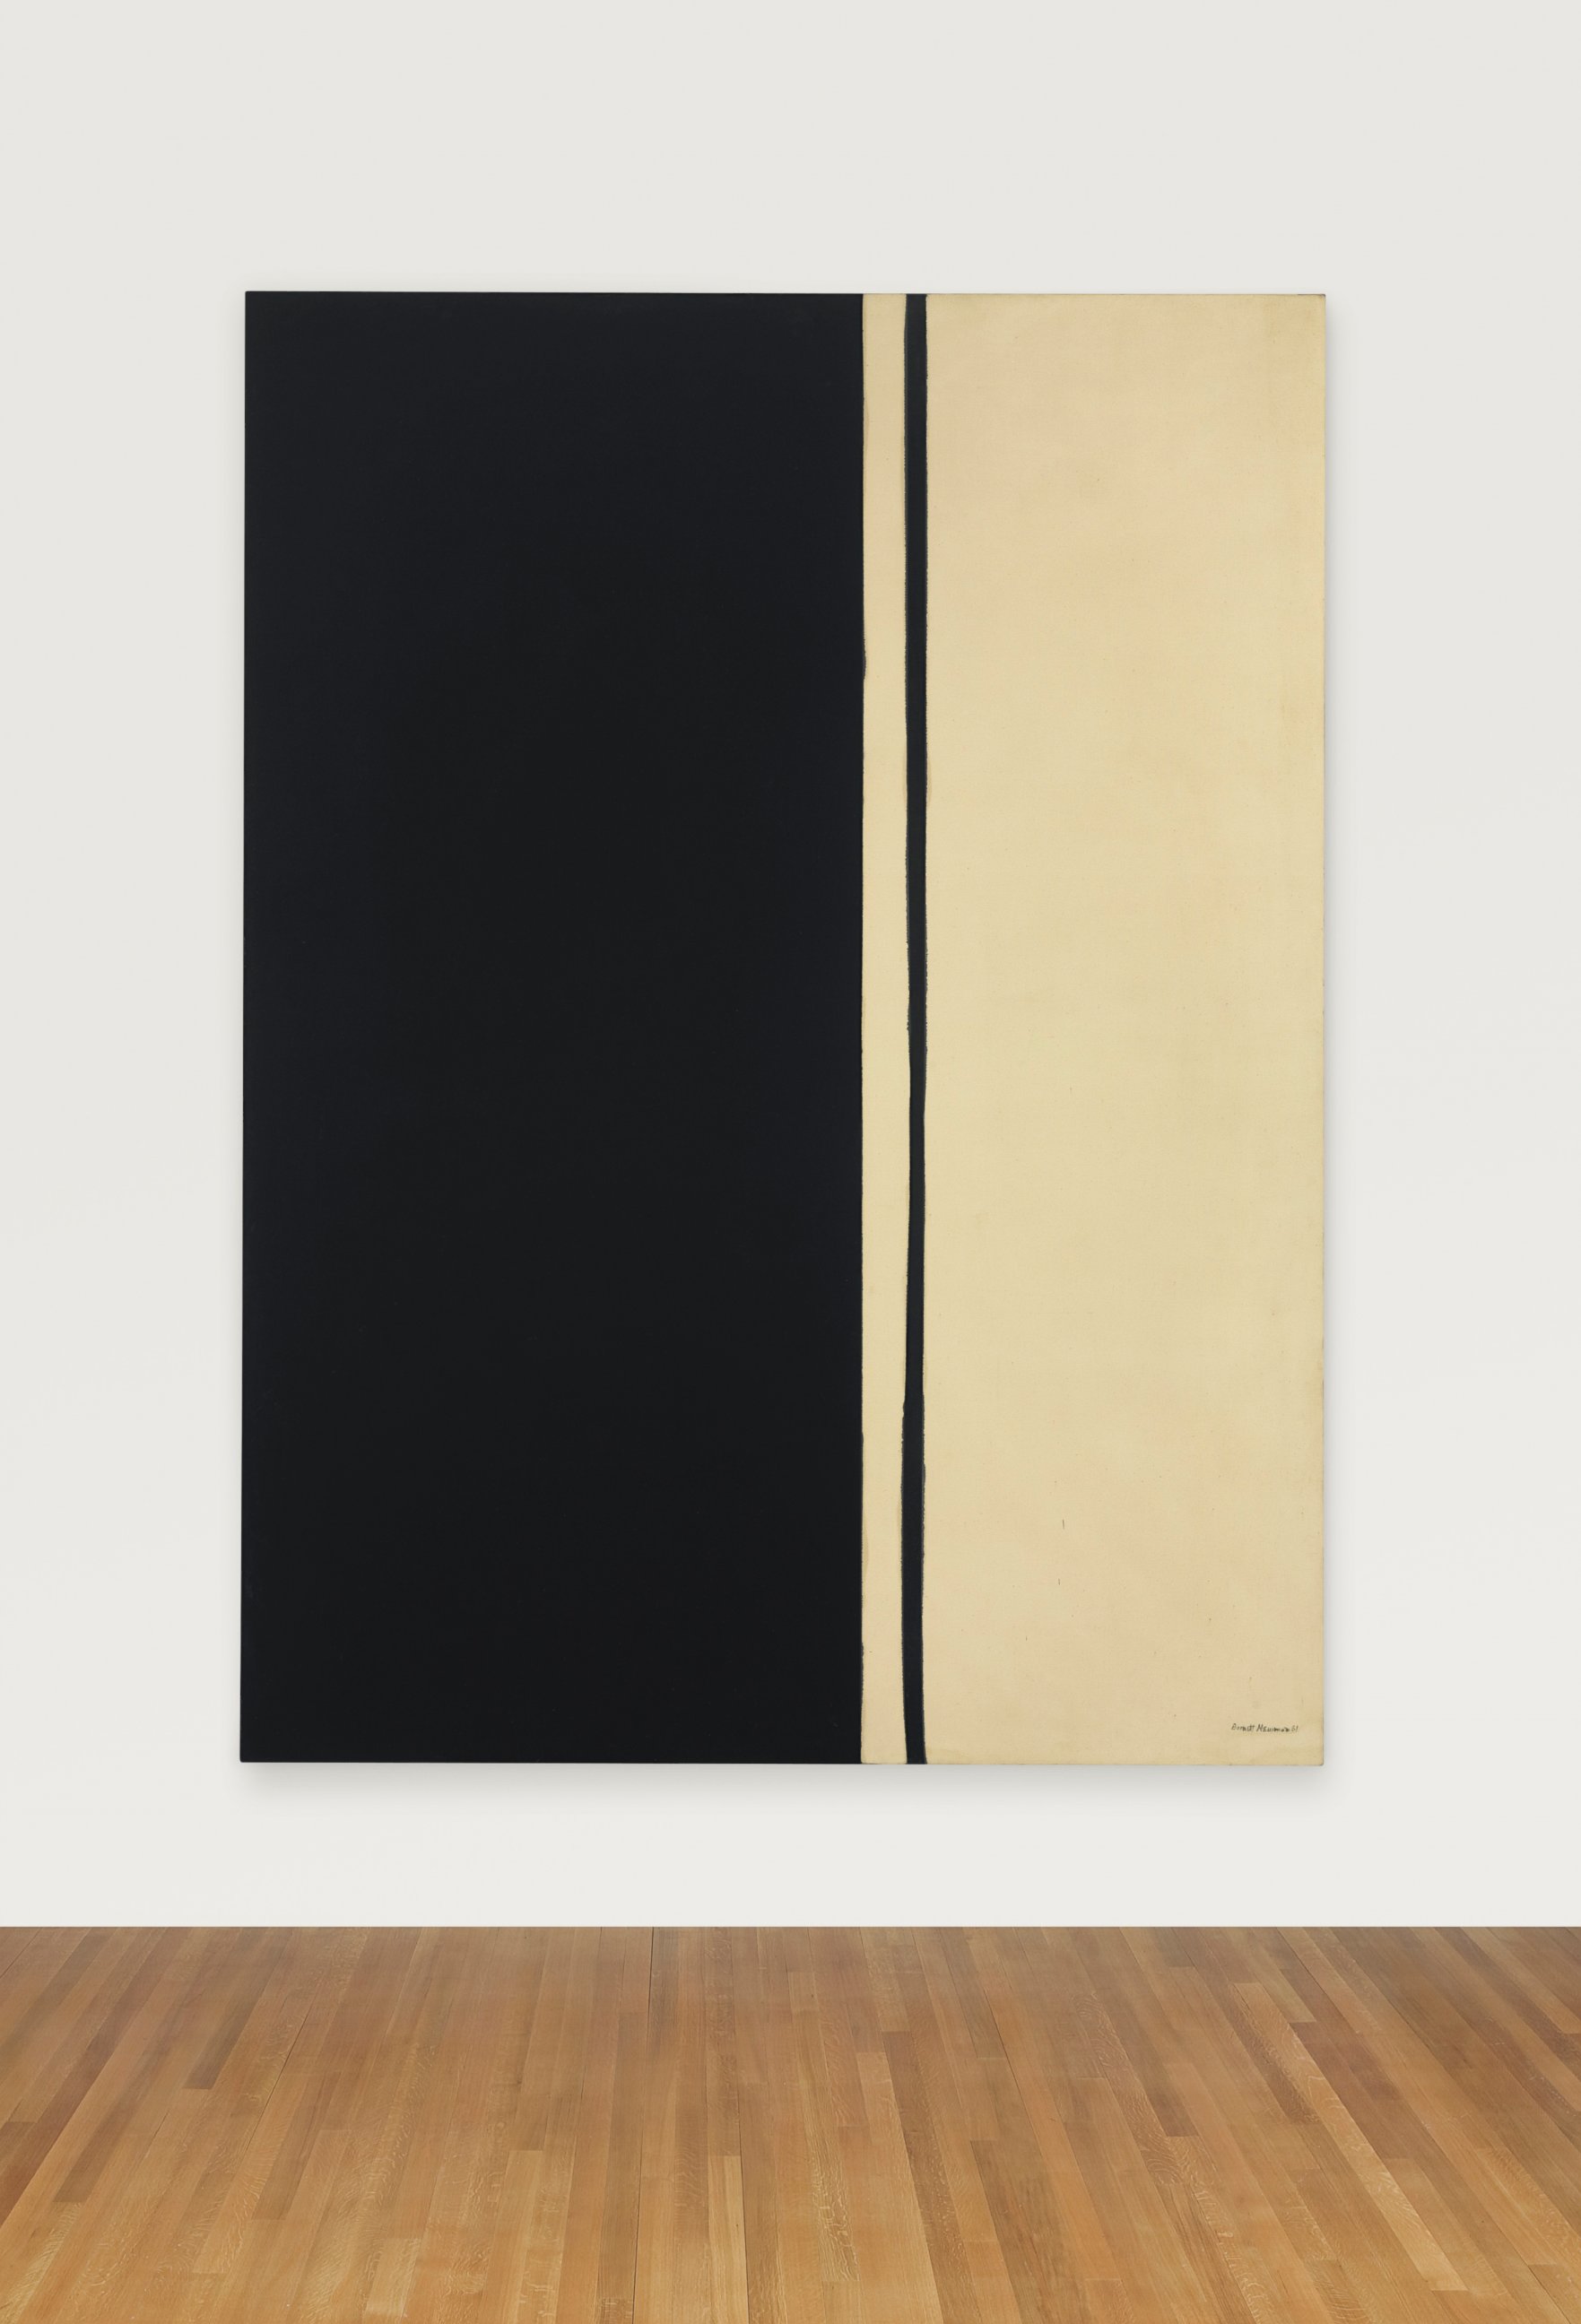 PHOTO: "Black Fire I" by Barnett Newman sold for $84,165,000.